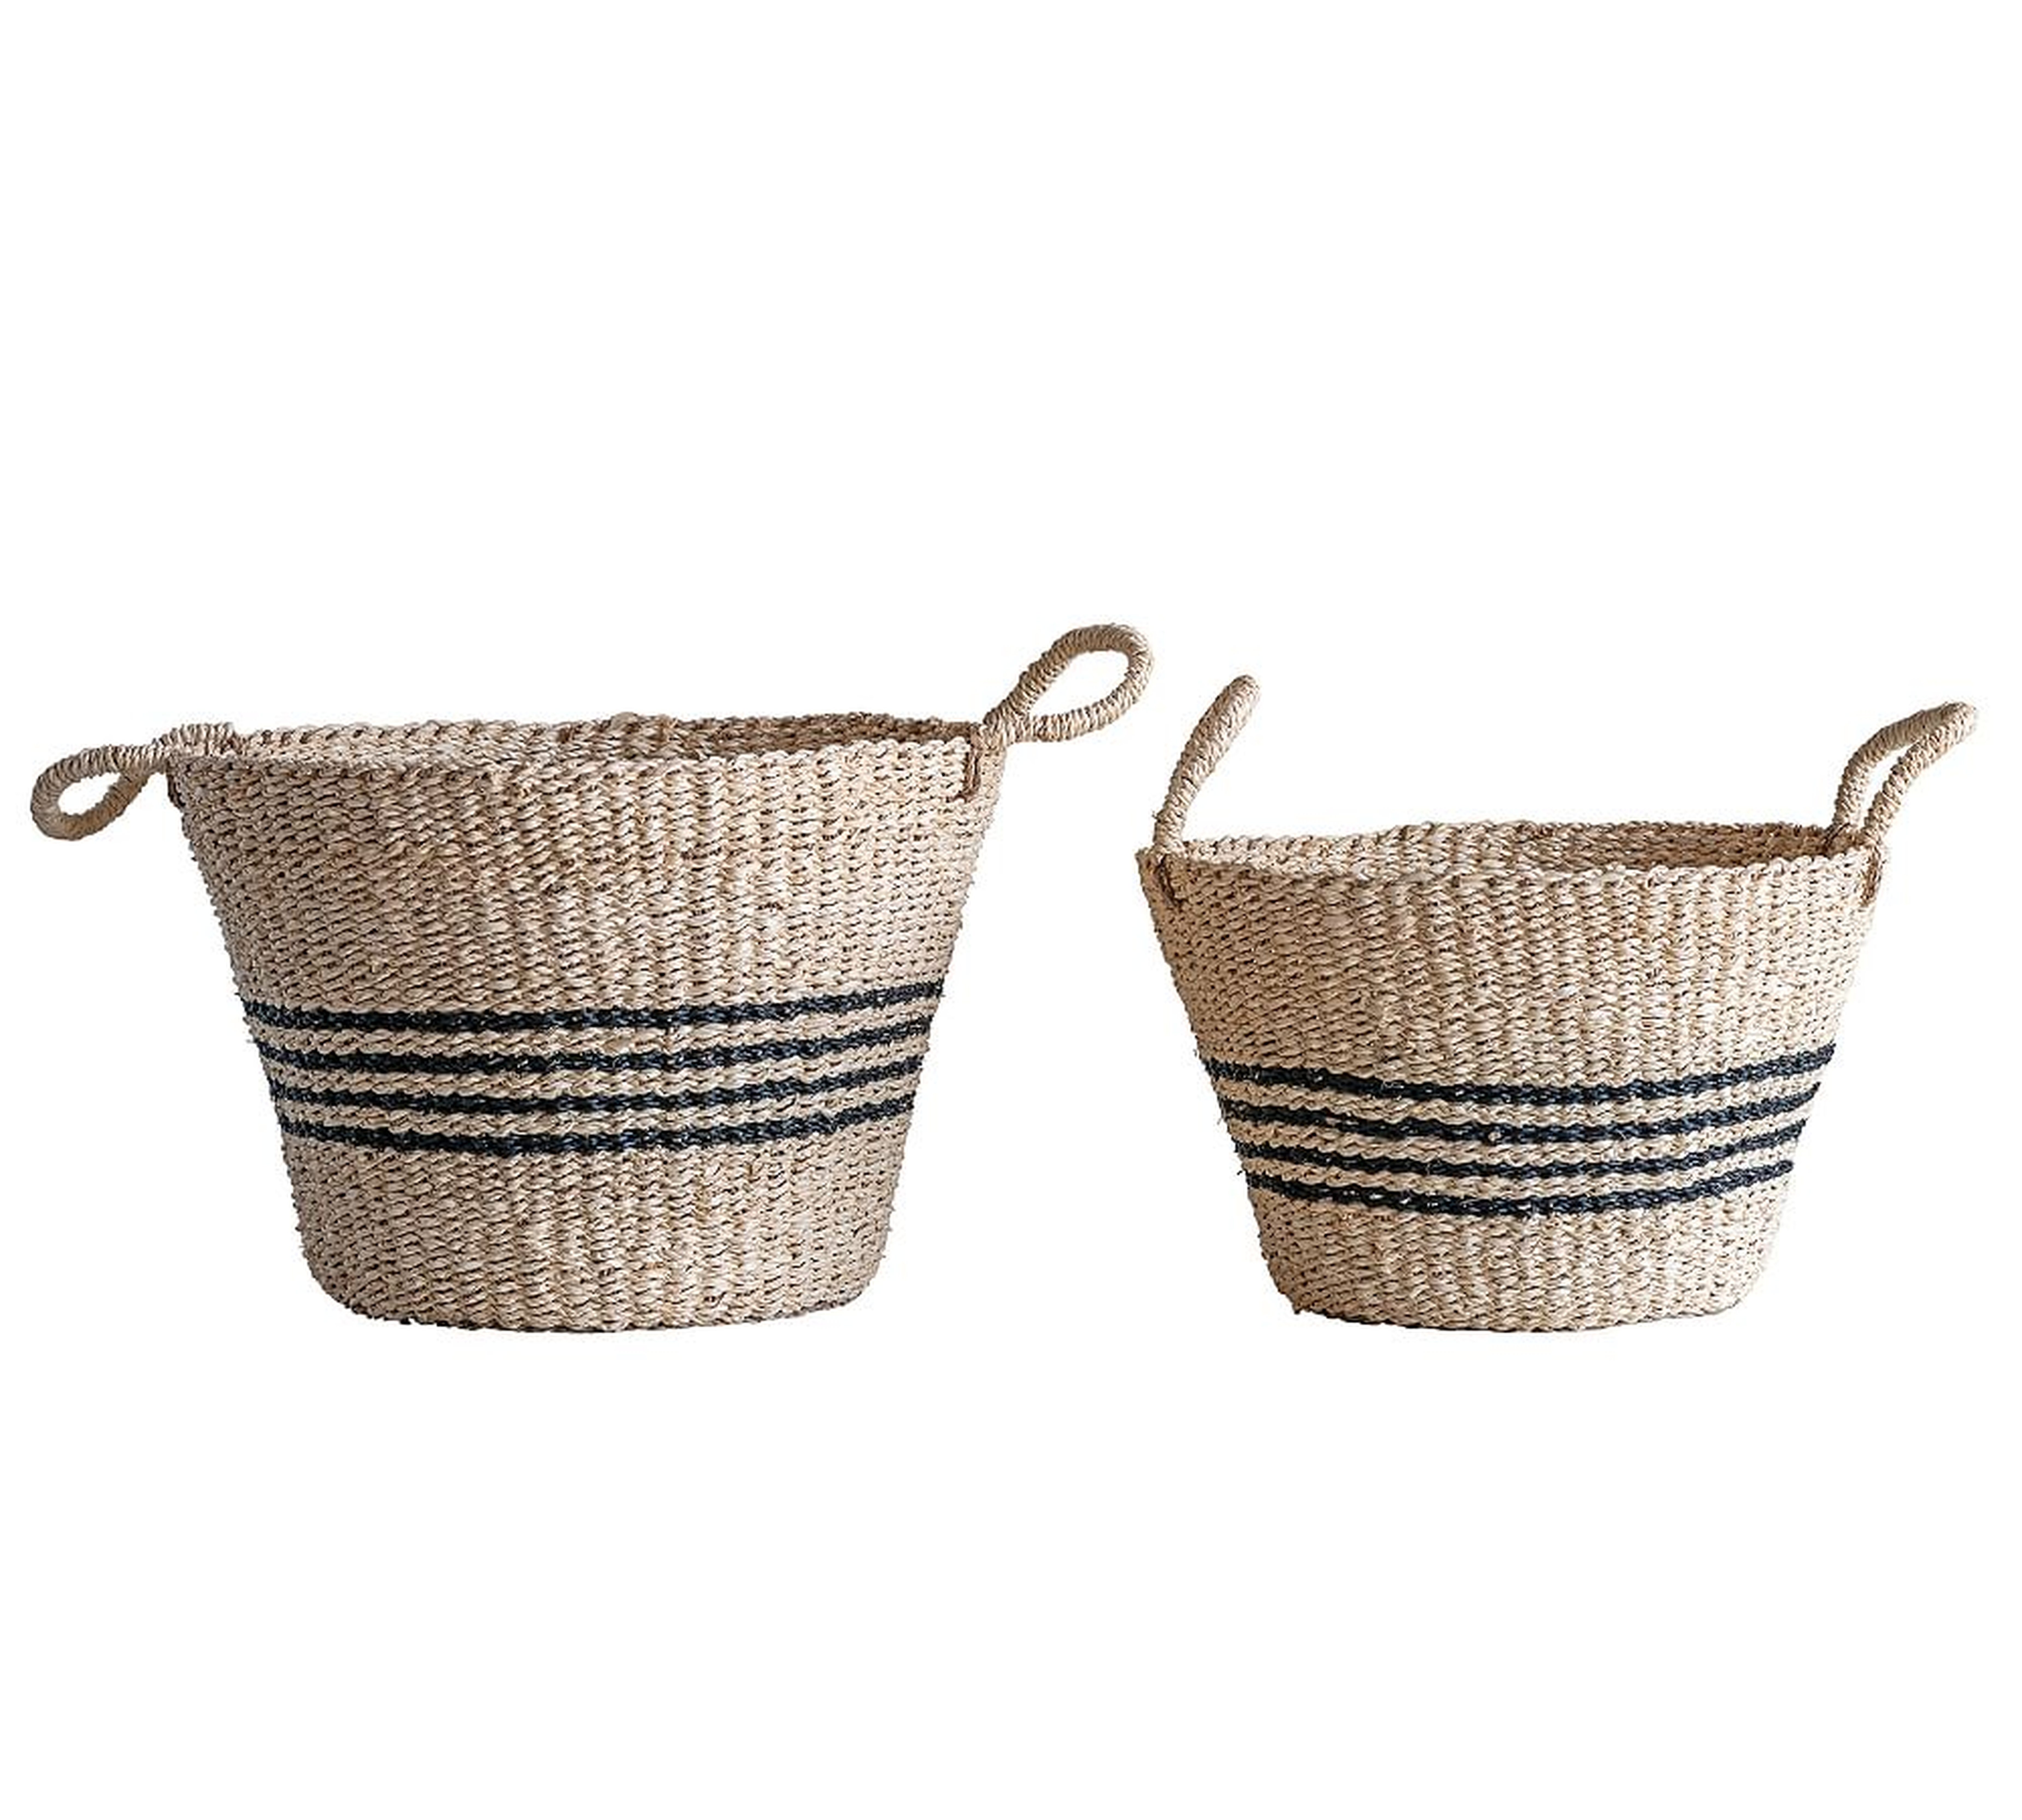 Madelyn Striped Seasgrass Baskets, Set of 2 - Pottery Barn